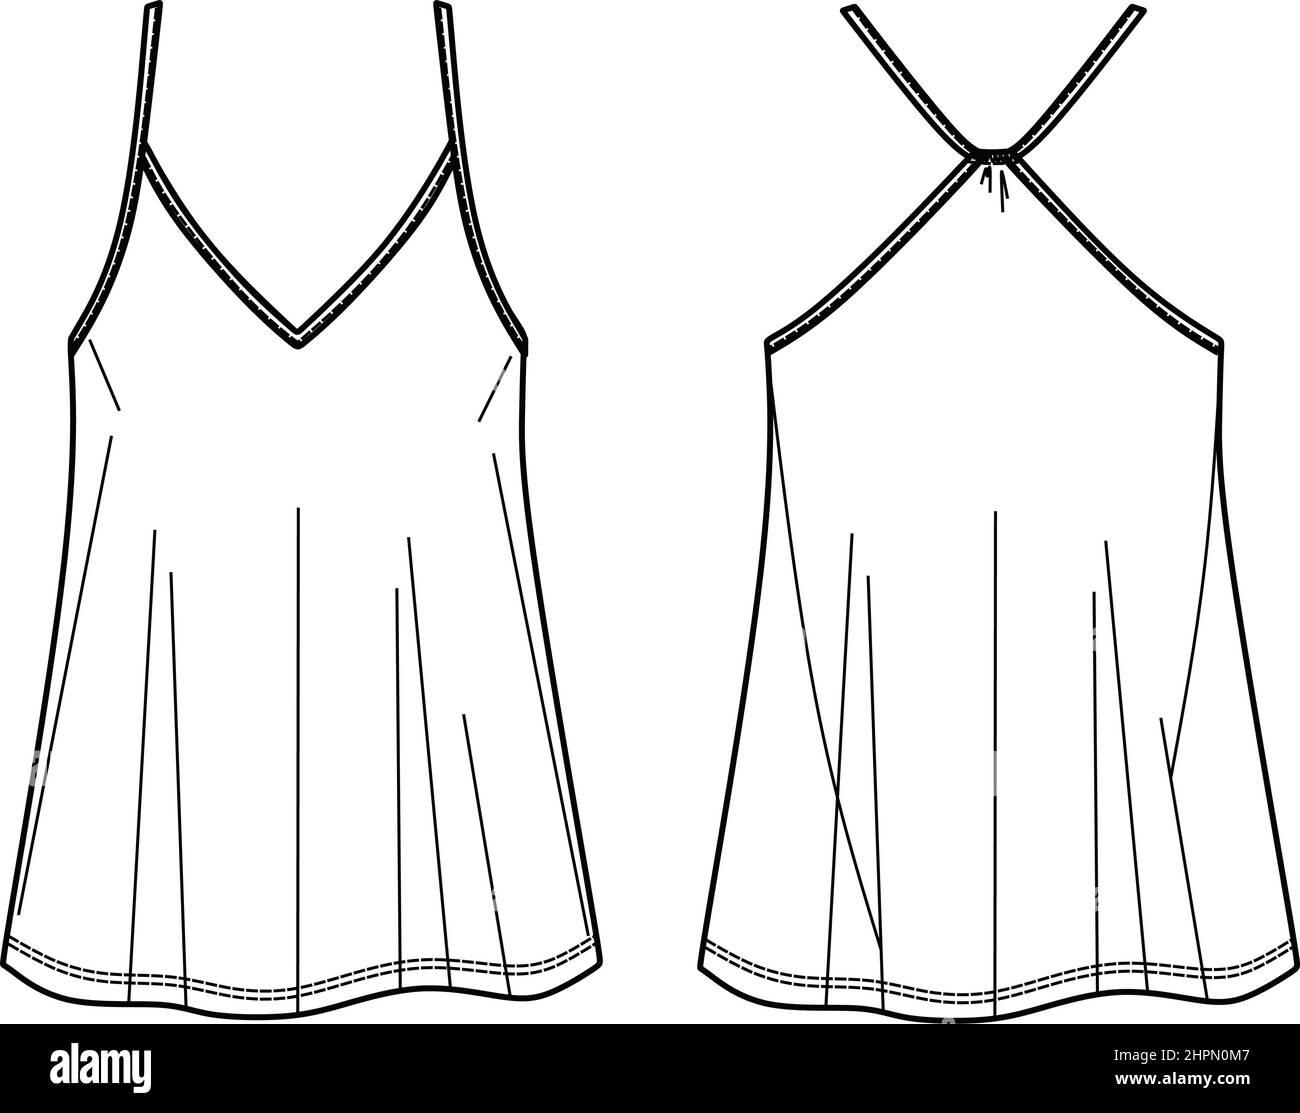 Camisole technical fashion illustration with flattering V-neck, straps, relaxed fit, tunic length. Flat outwear tank apparel template front, back, whi Stock Vector